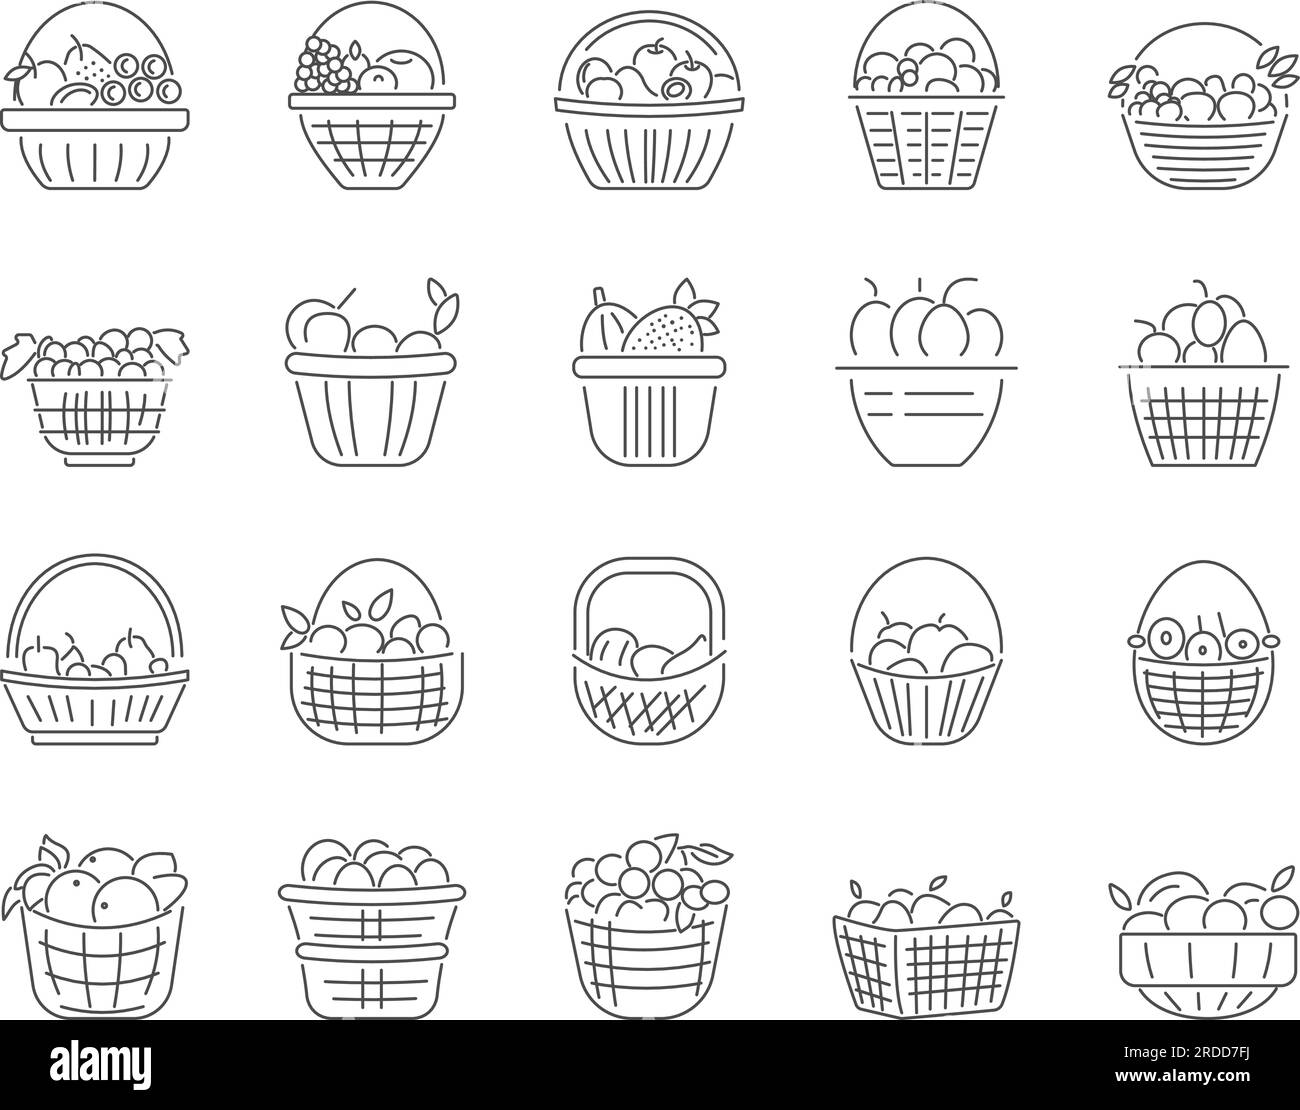 Basket of Fruits Icons Set. Apples, Oranges, Grapes, Pears. Editable Stroke. Simple Icons Vector Collection Stock Vector